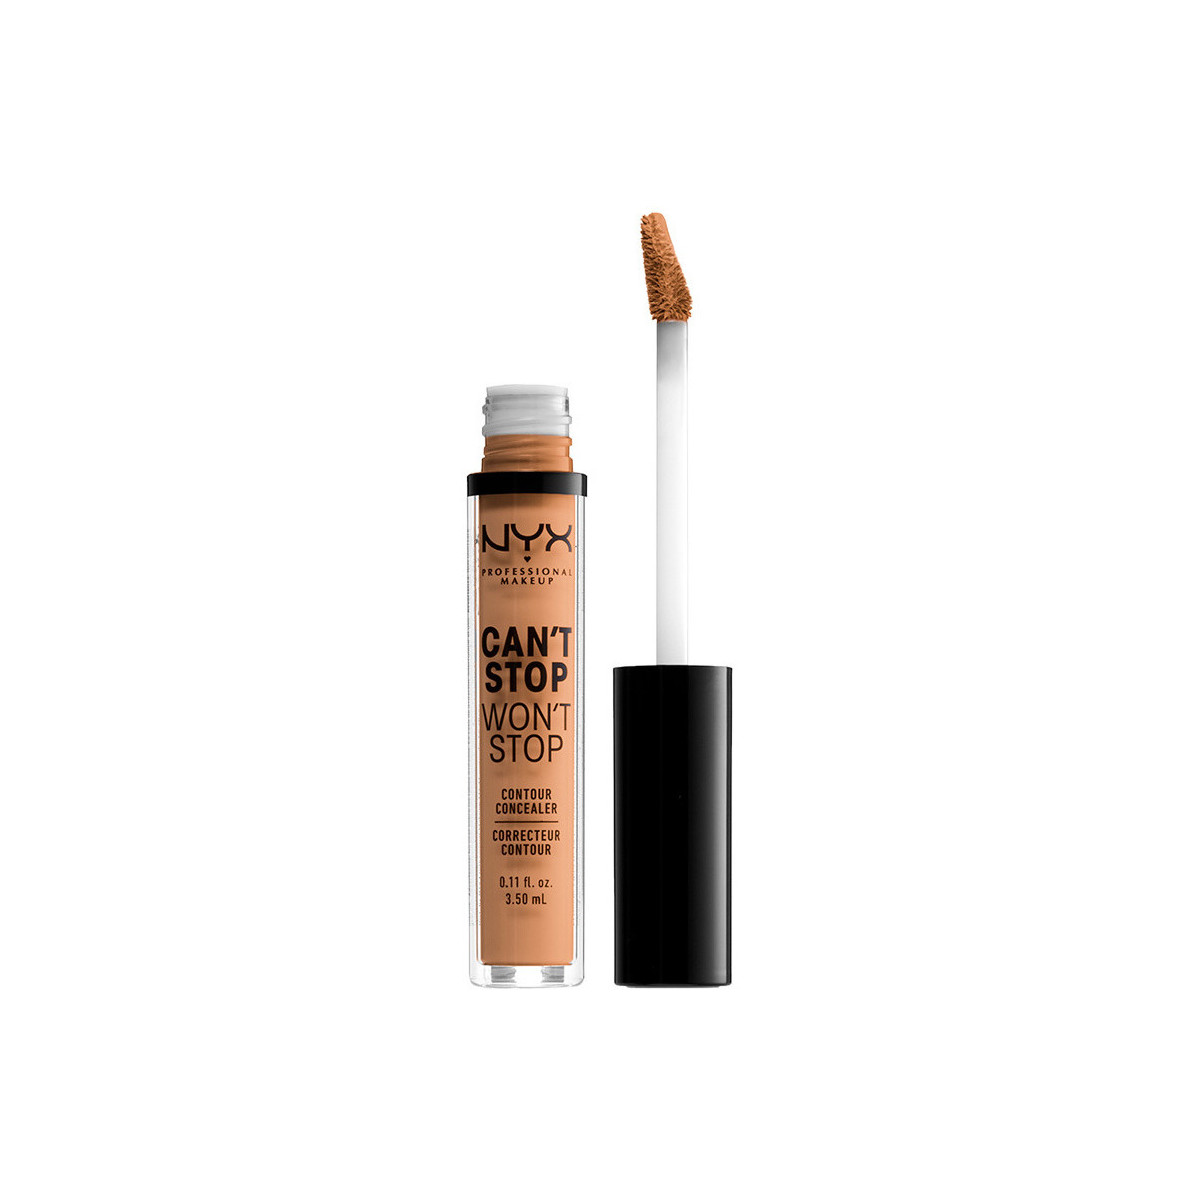 Beauty Make-up & Foundation  Nyx Professional Make Up Can't Stop Won't Stop Contour Concealer neutral Buff 